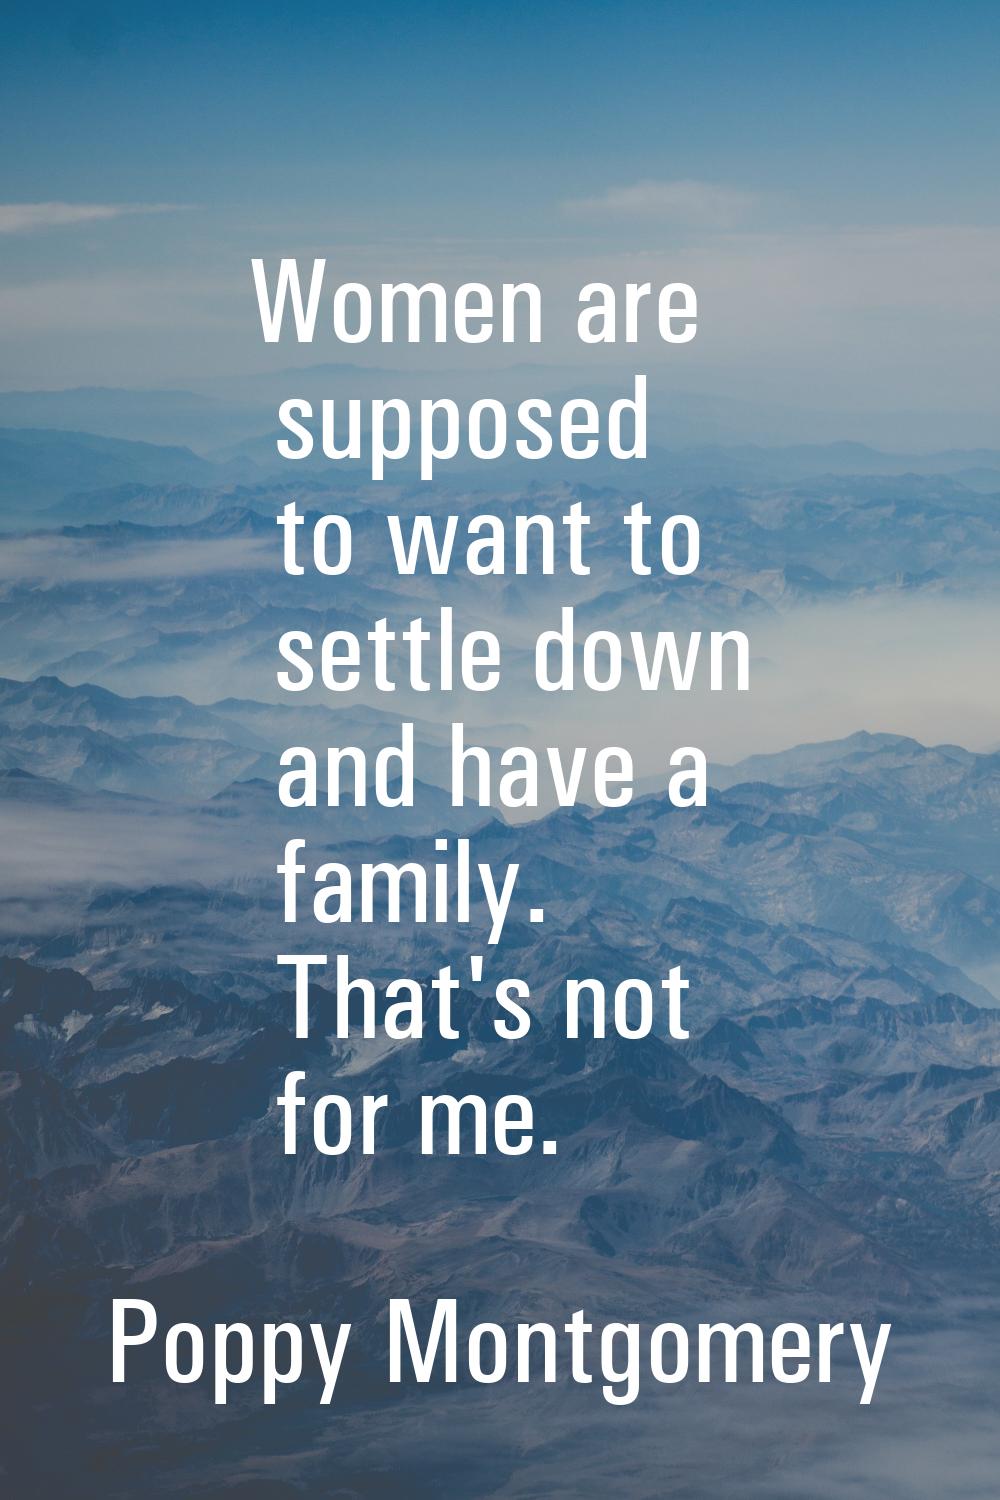 Women are supposed to want to settle down and have a family. That's not for me.